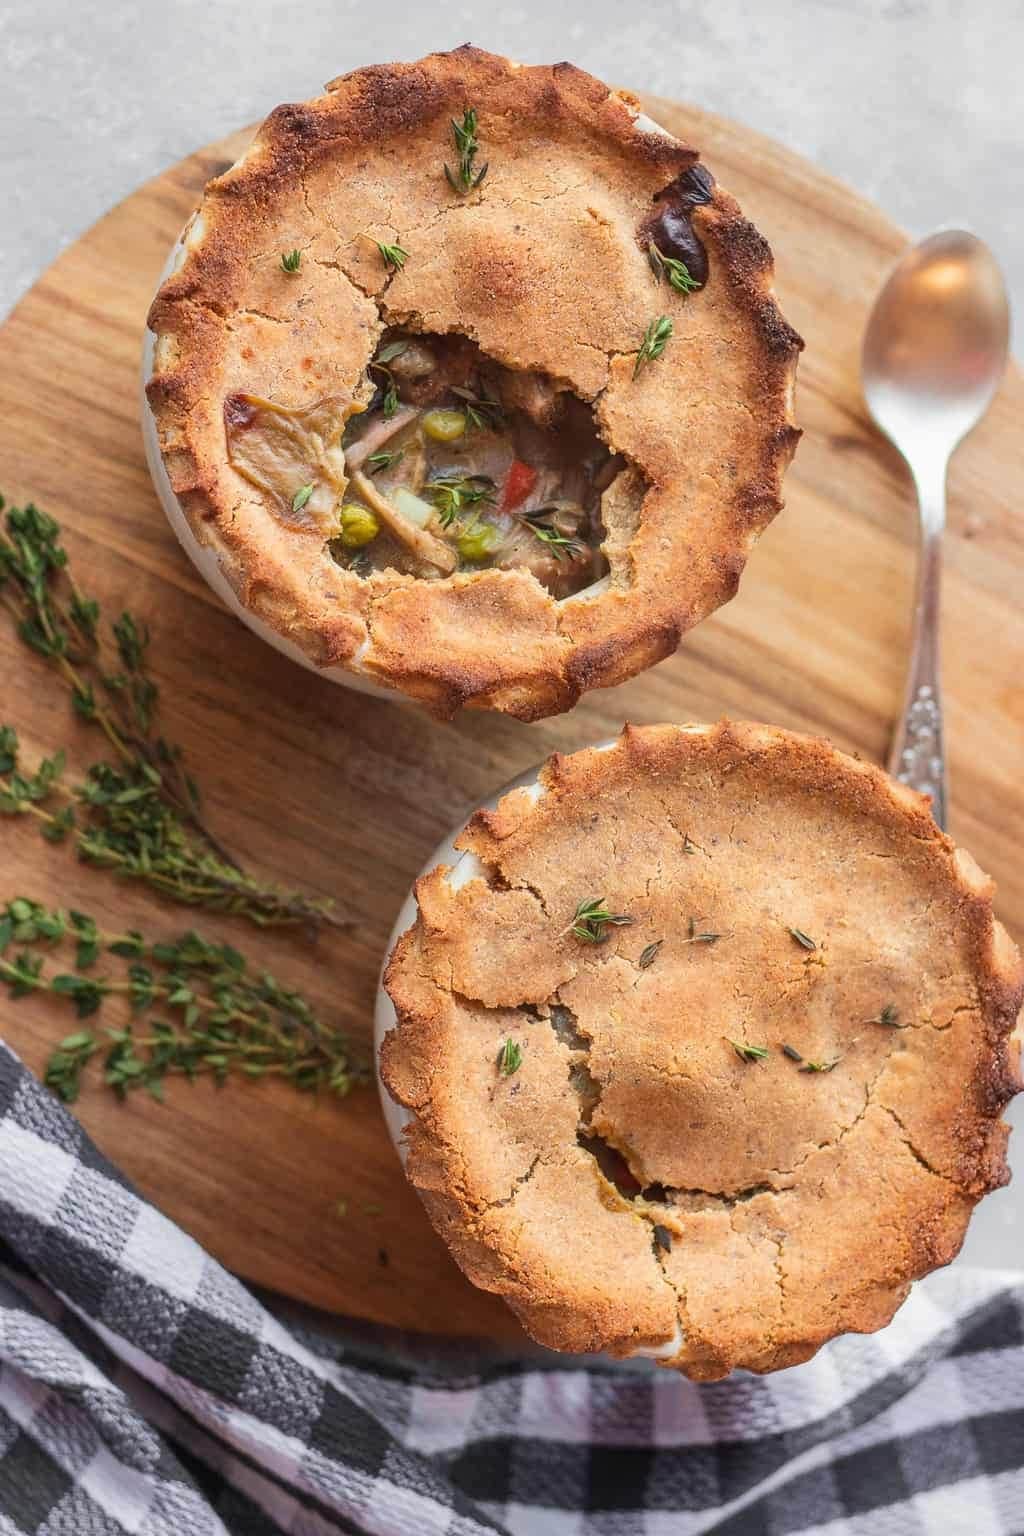 Two small pot pies on a wooden tray.